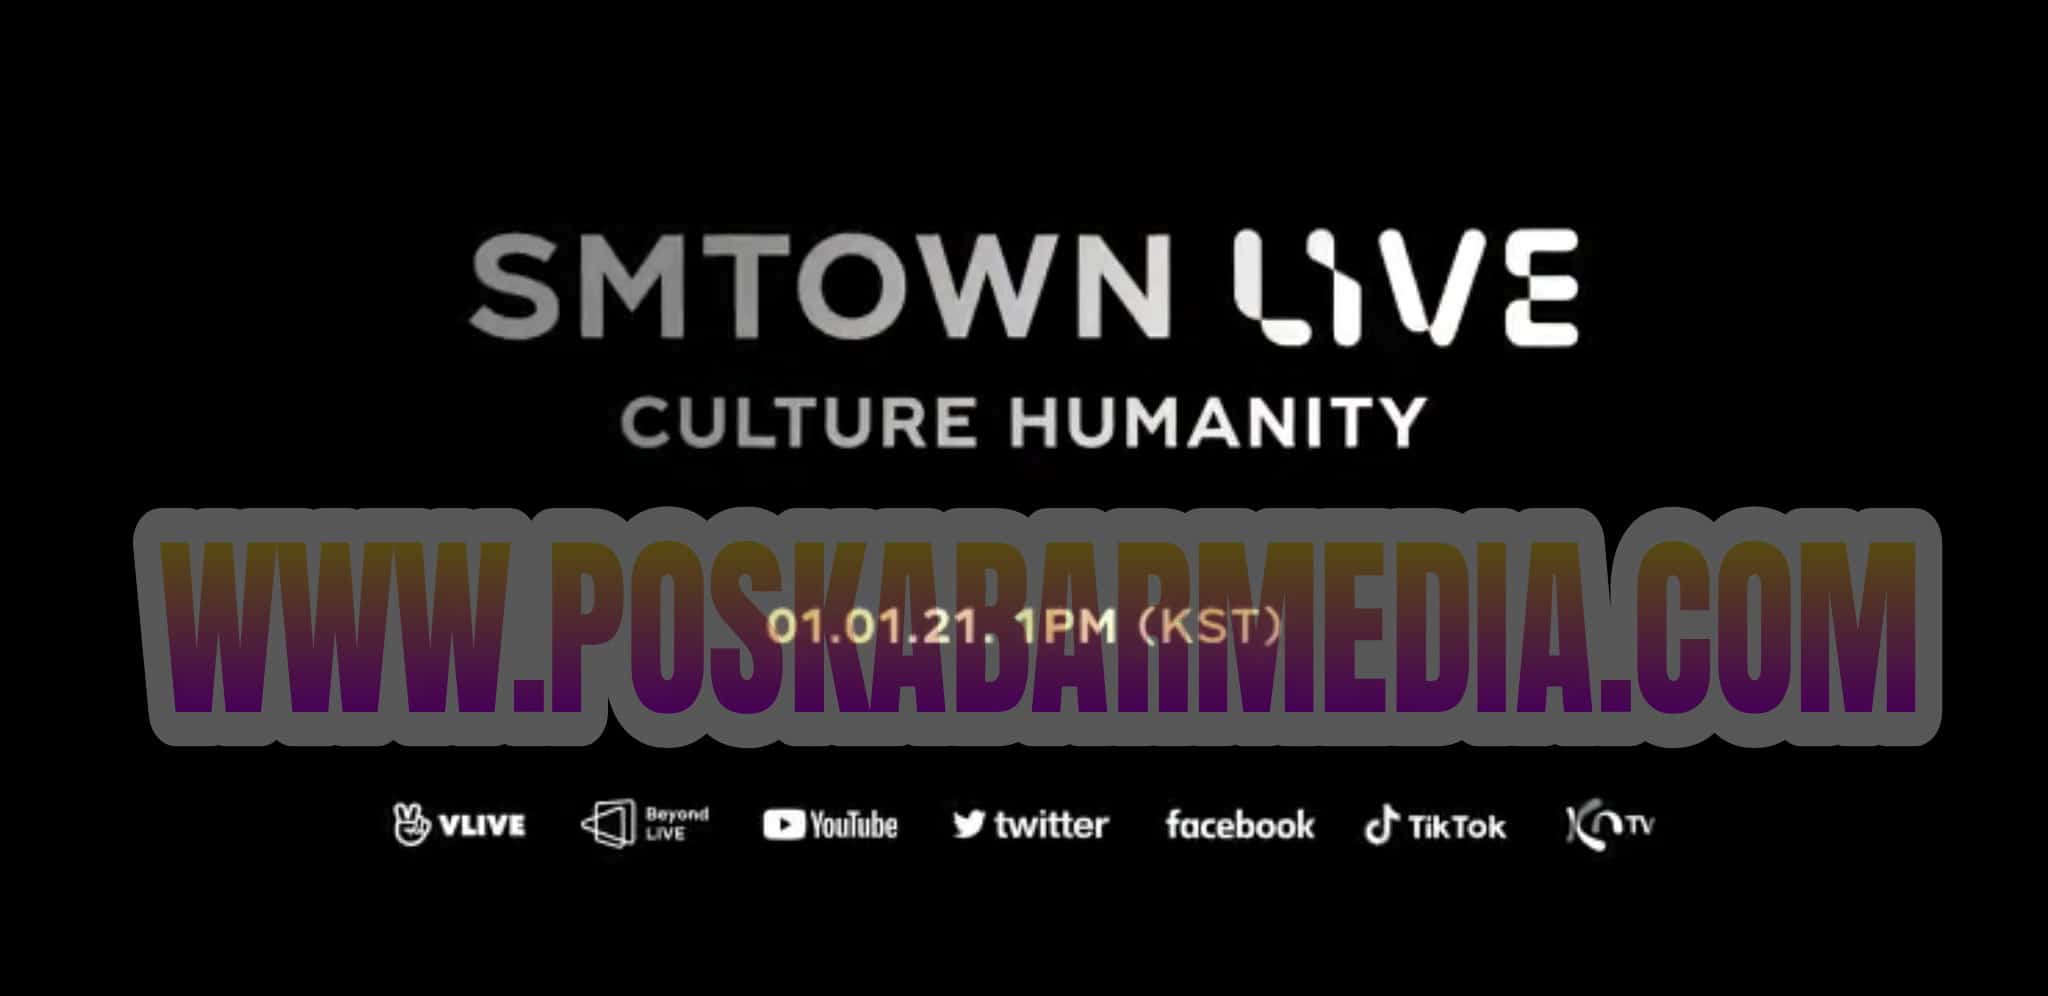 Smtown Culture Humanity